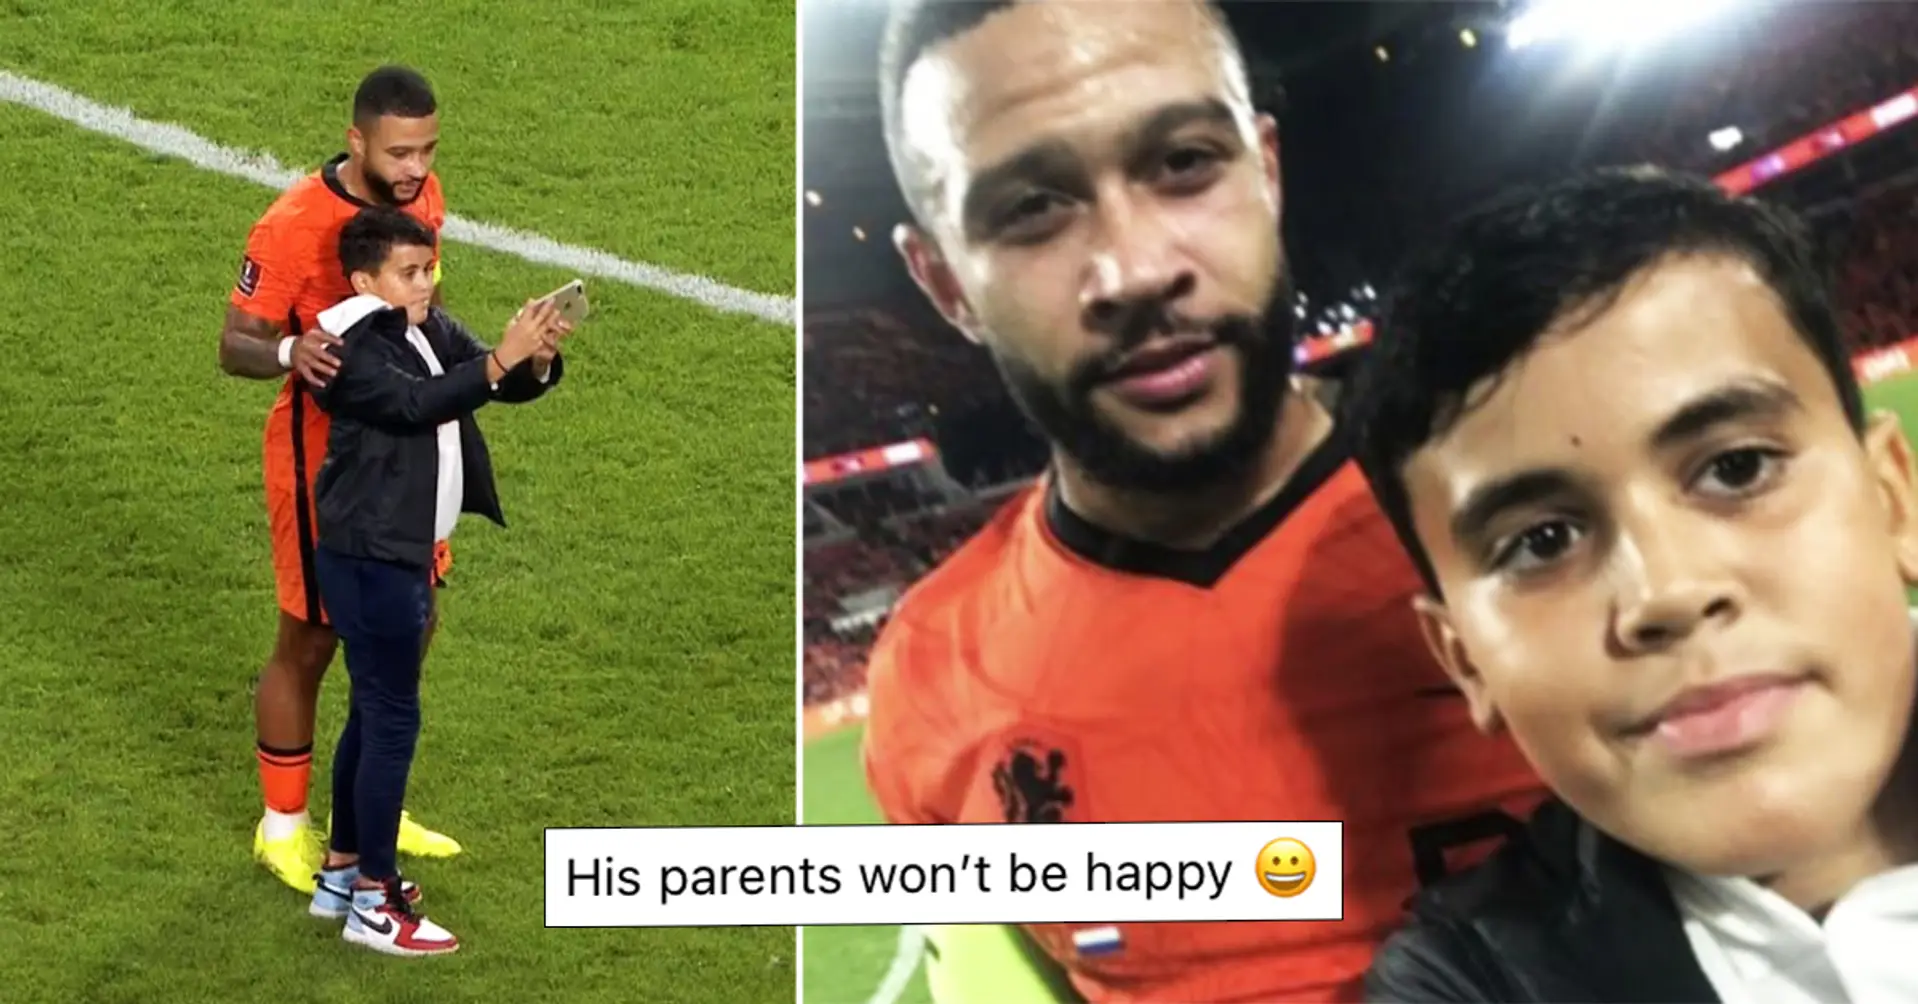 Revealed: how much money this little kid had to pay after taking selfie with Depay during match